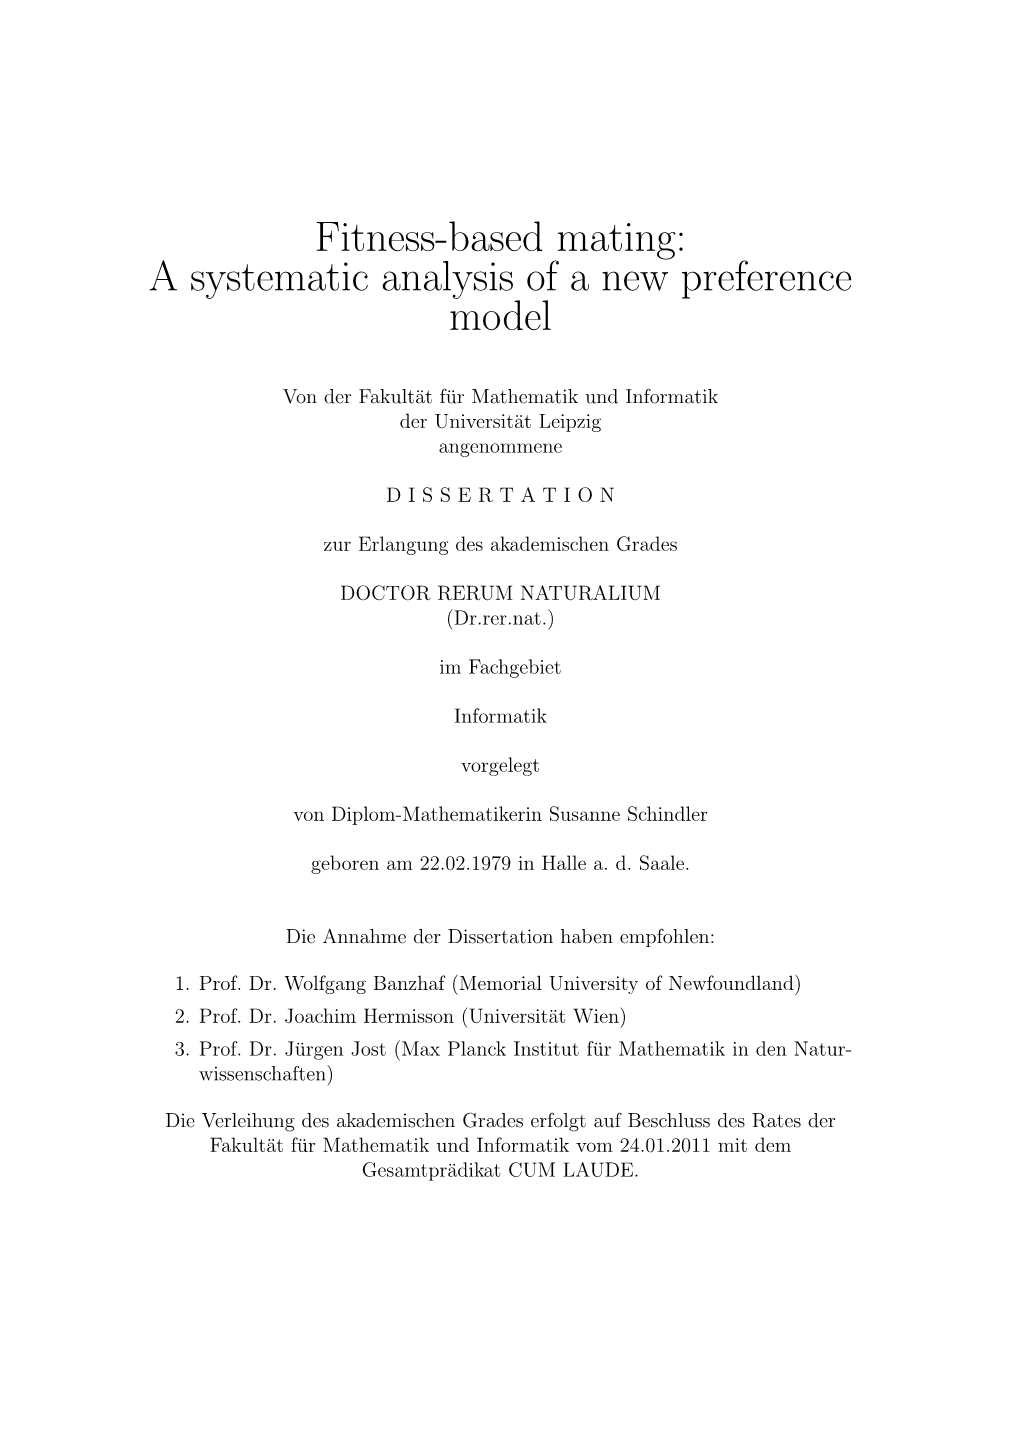 Fitness-Based Mating: a Systematic Analysis of a New Preference Model